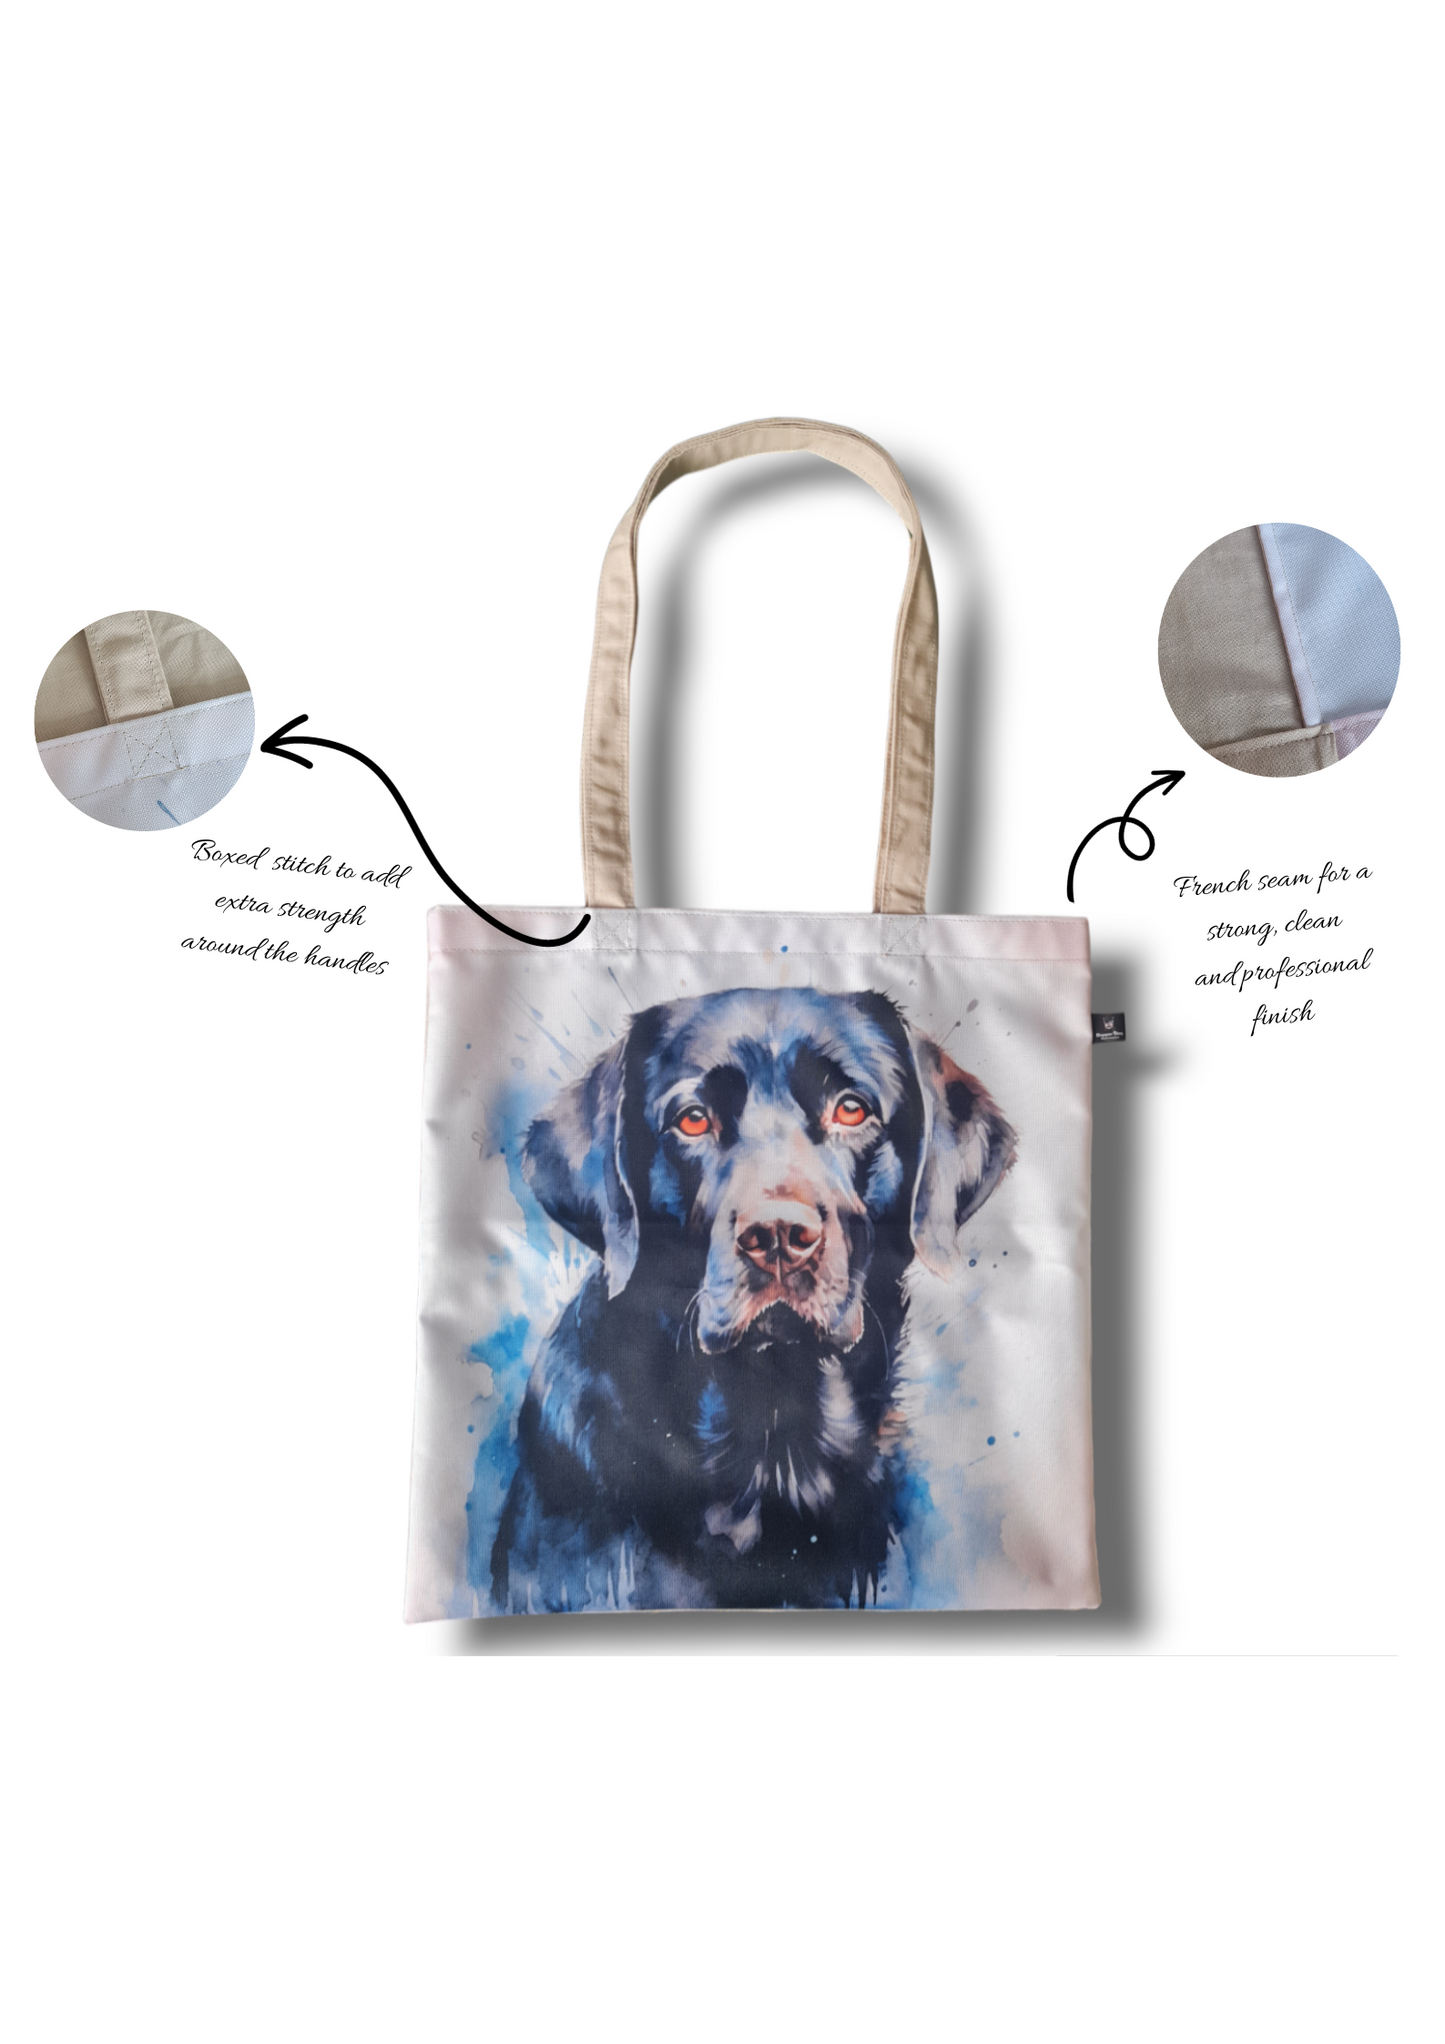 Tote bag - floral greyhound meadow